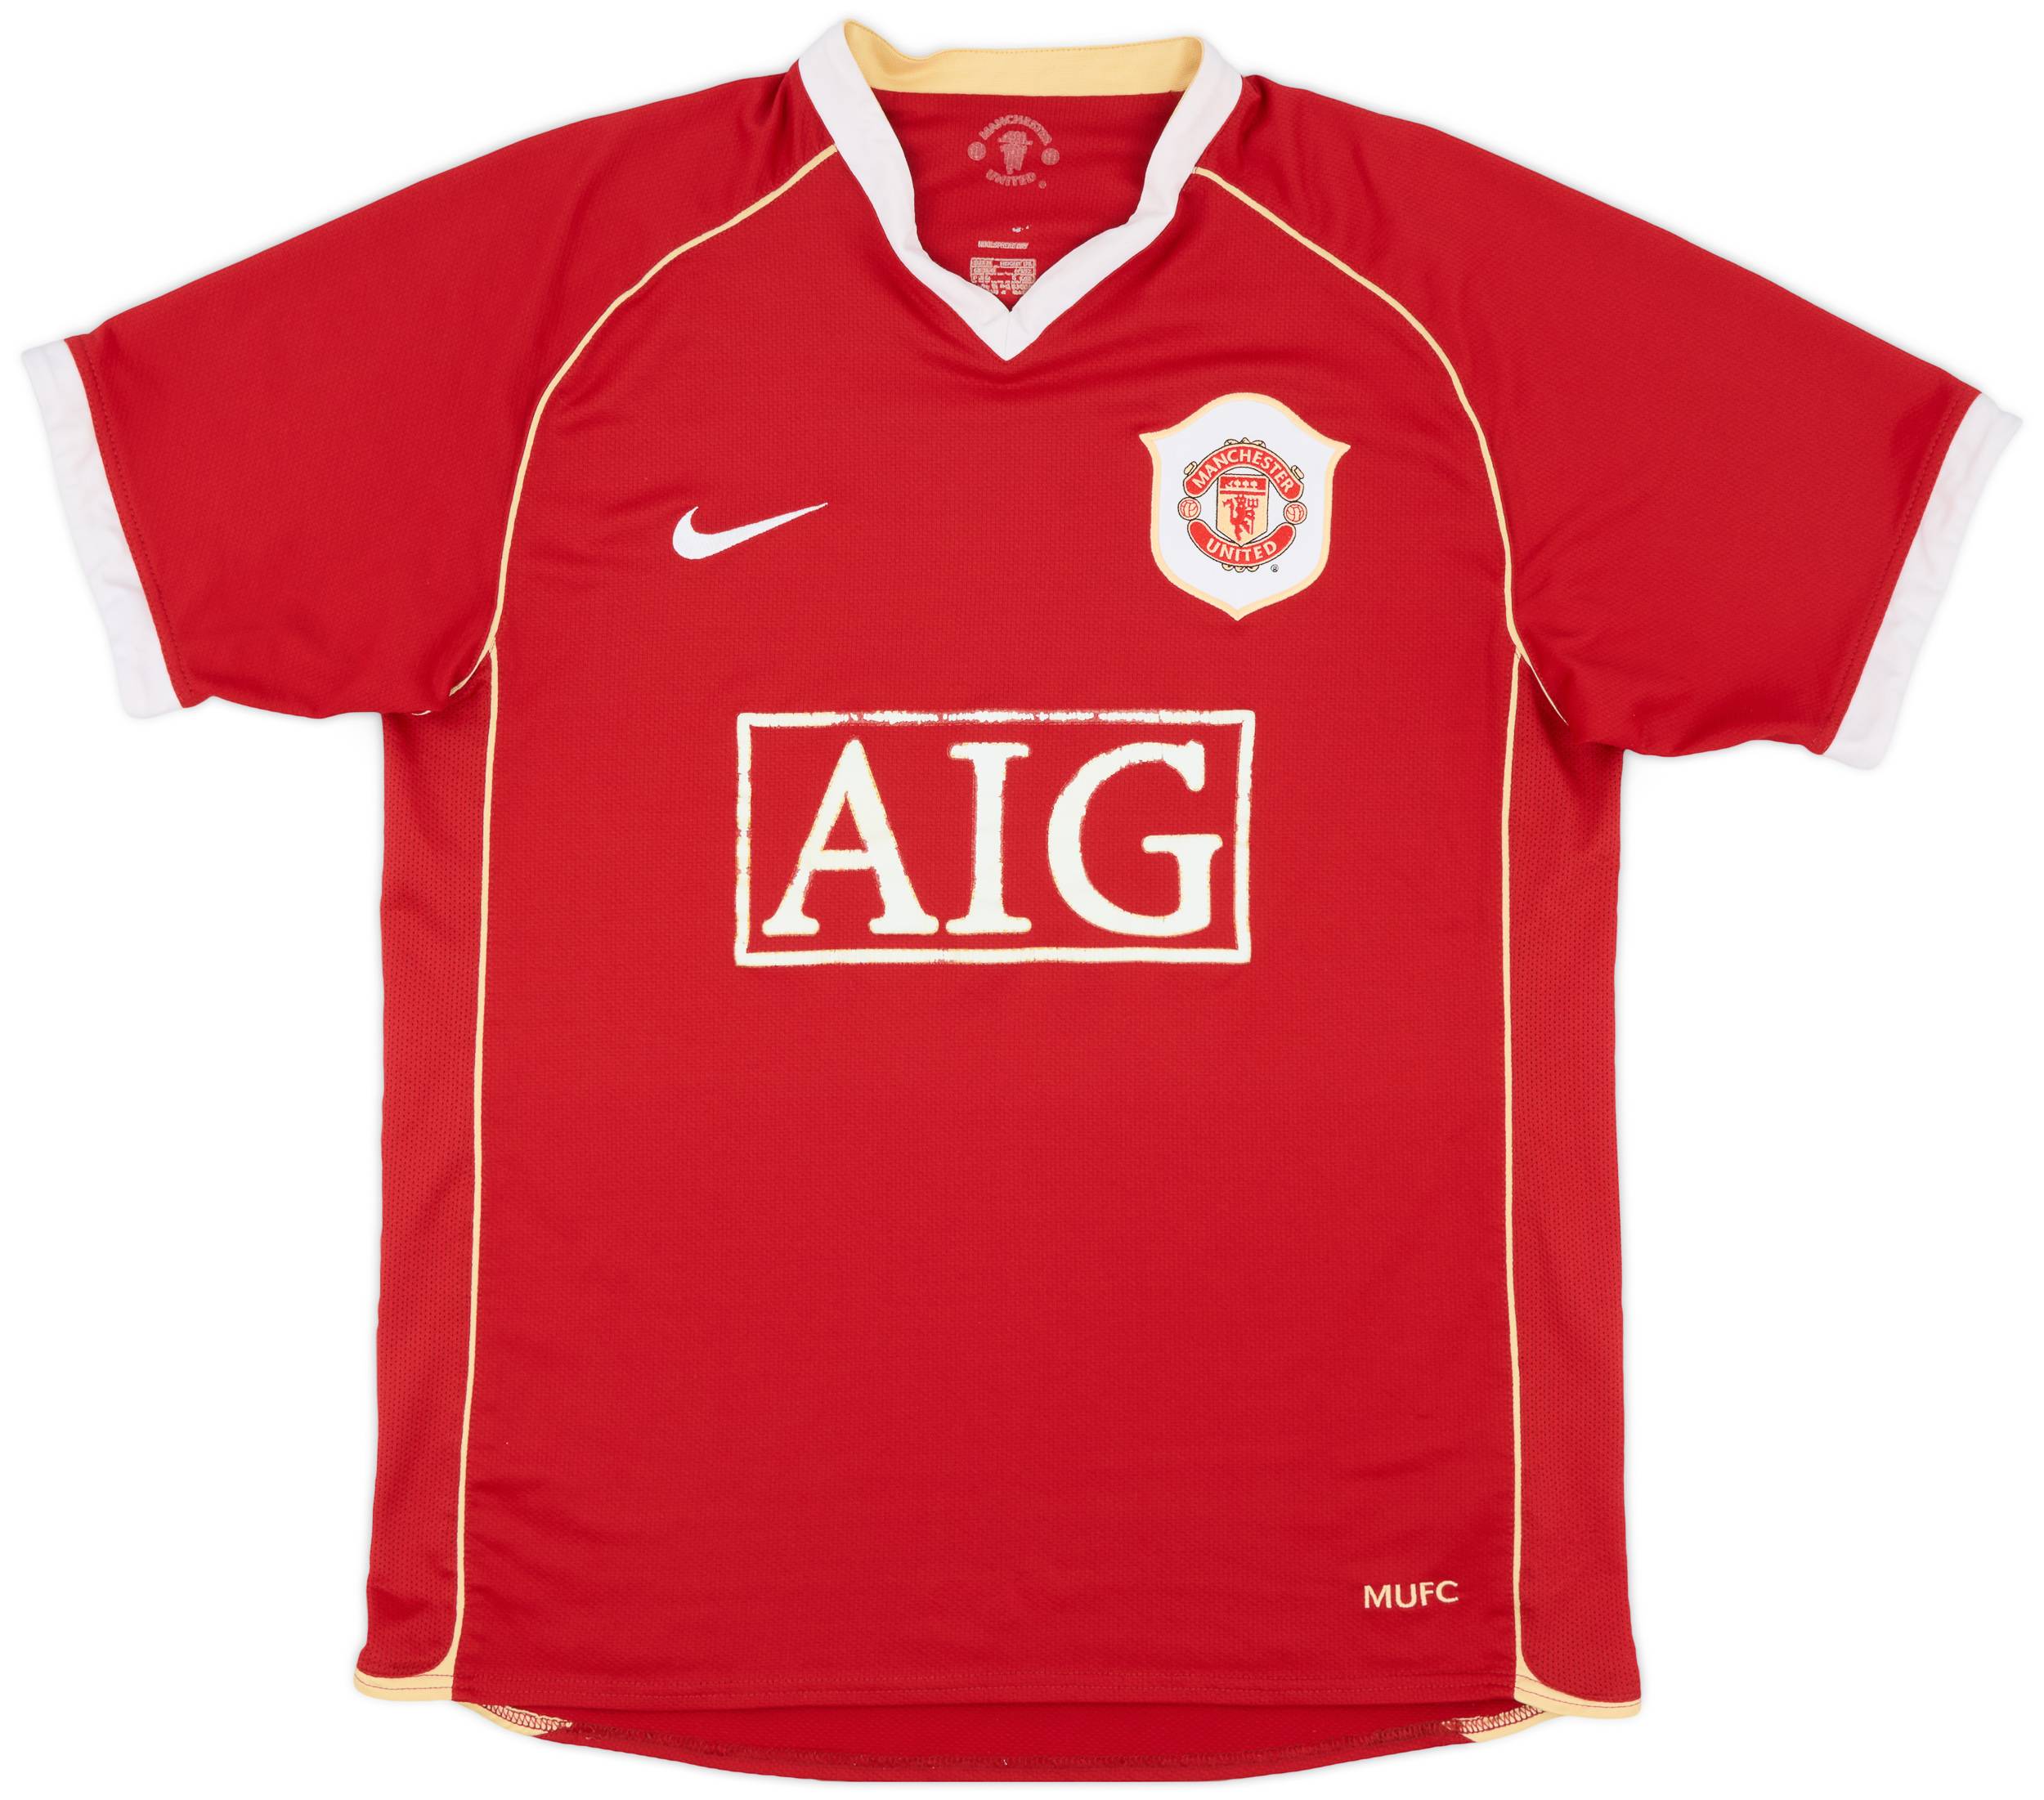 2006-07 Manchester United Home Shirt - 5/10 - (M)